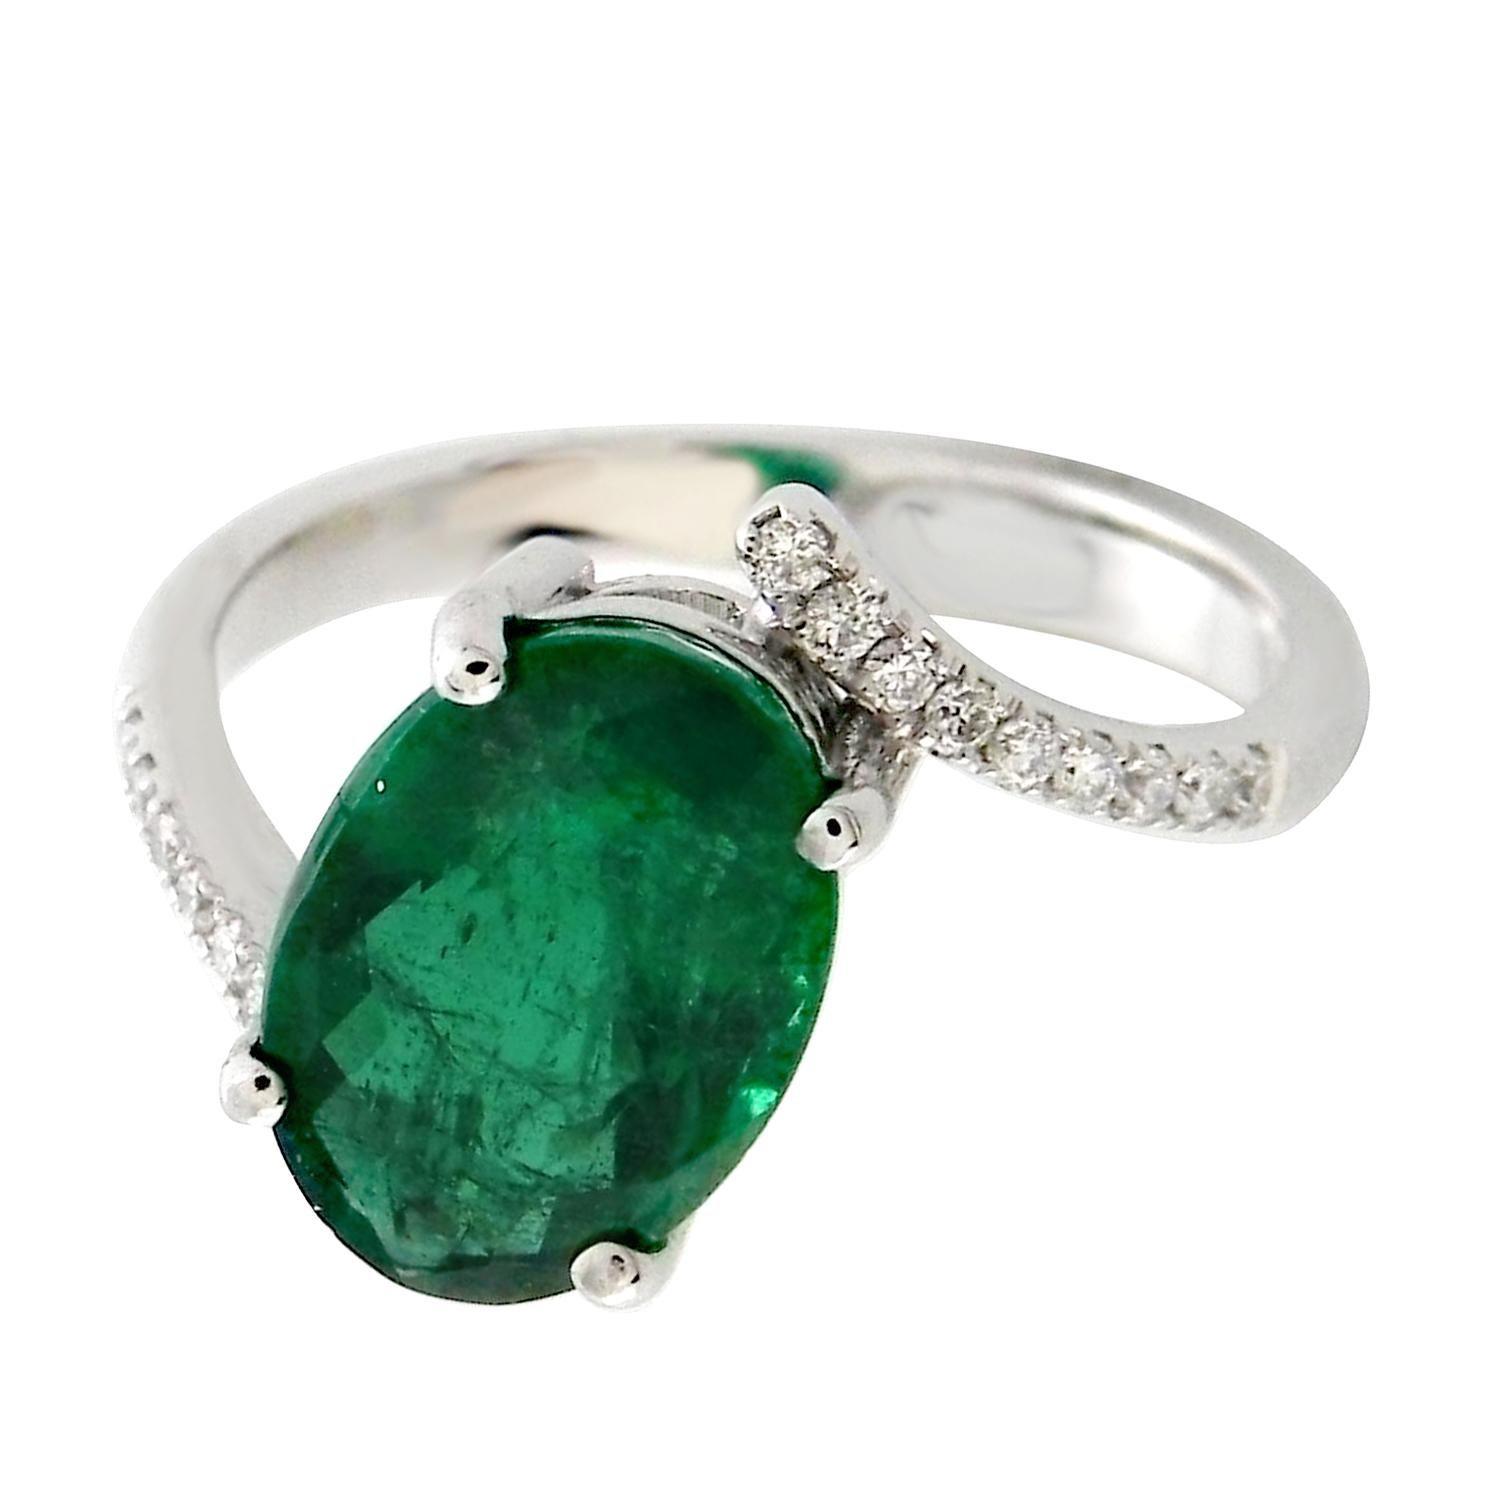 Artisan Oval Shaped Emerald Ring With Diamonds Made In 18k Gold For Sale